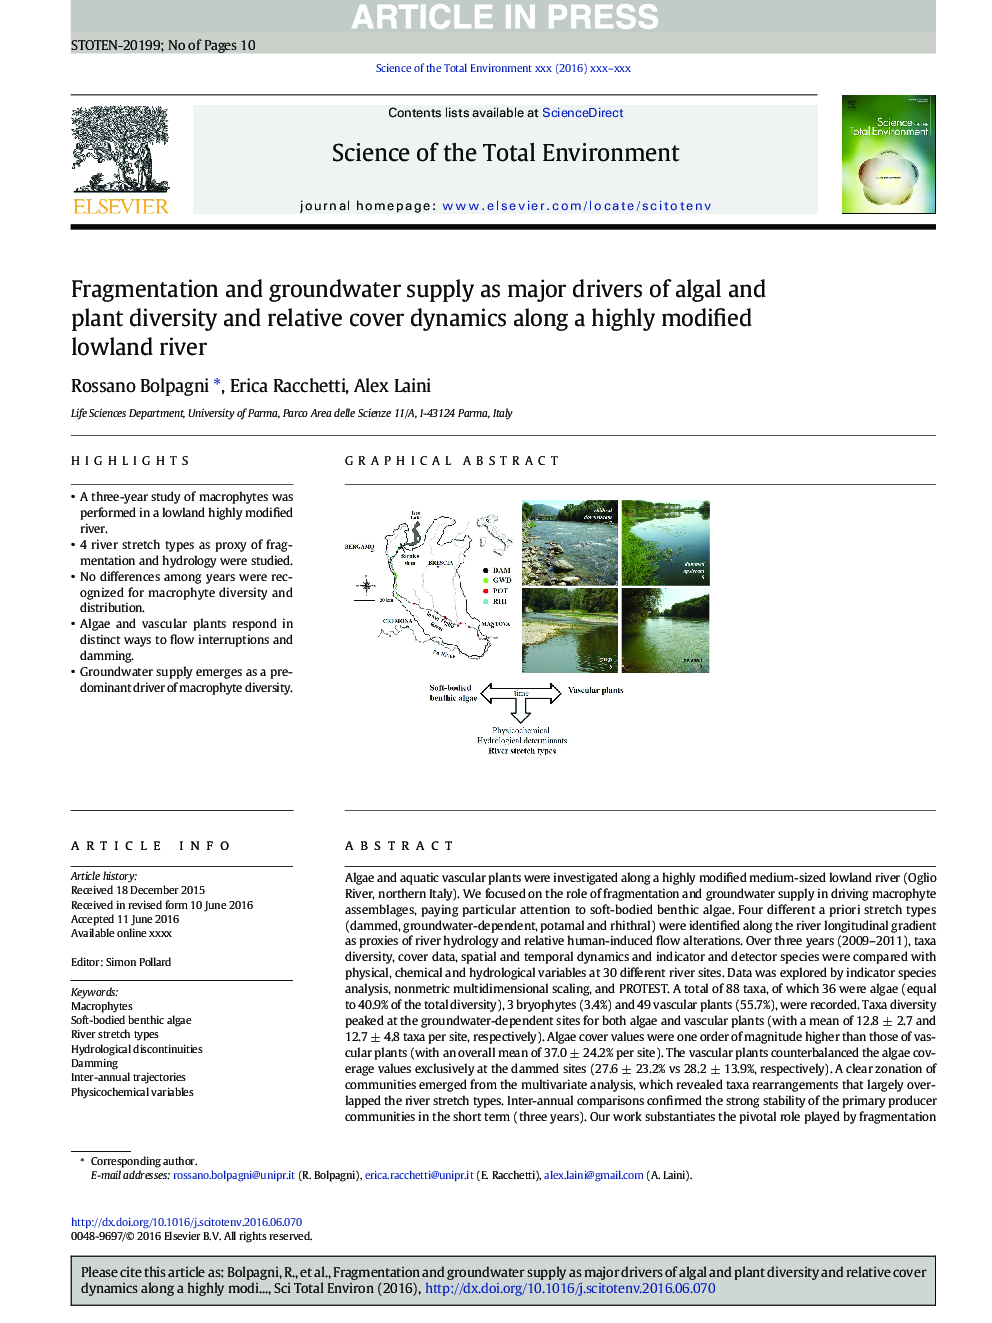 Fragmentation and groundwater supply as major drivers of algal and plant diversity and relative cover dynamics along a highly modified lowland river